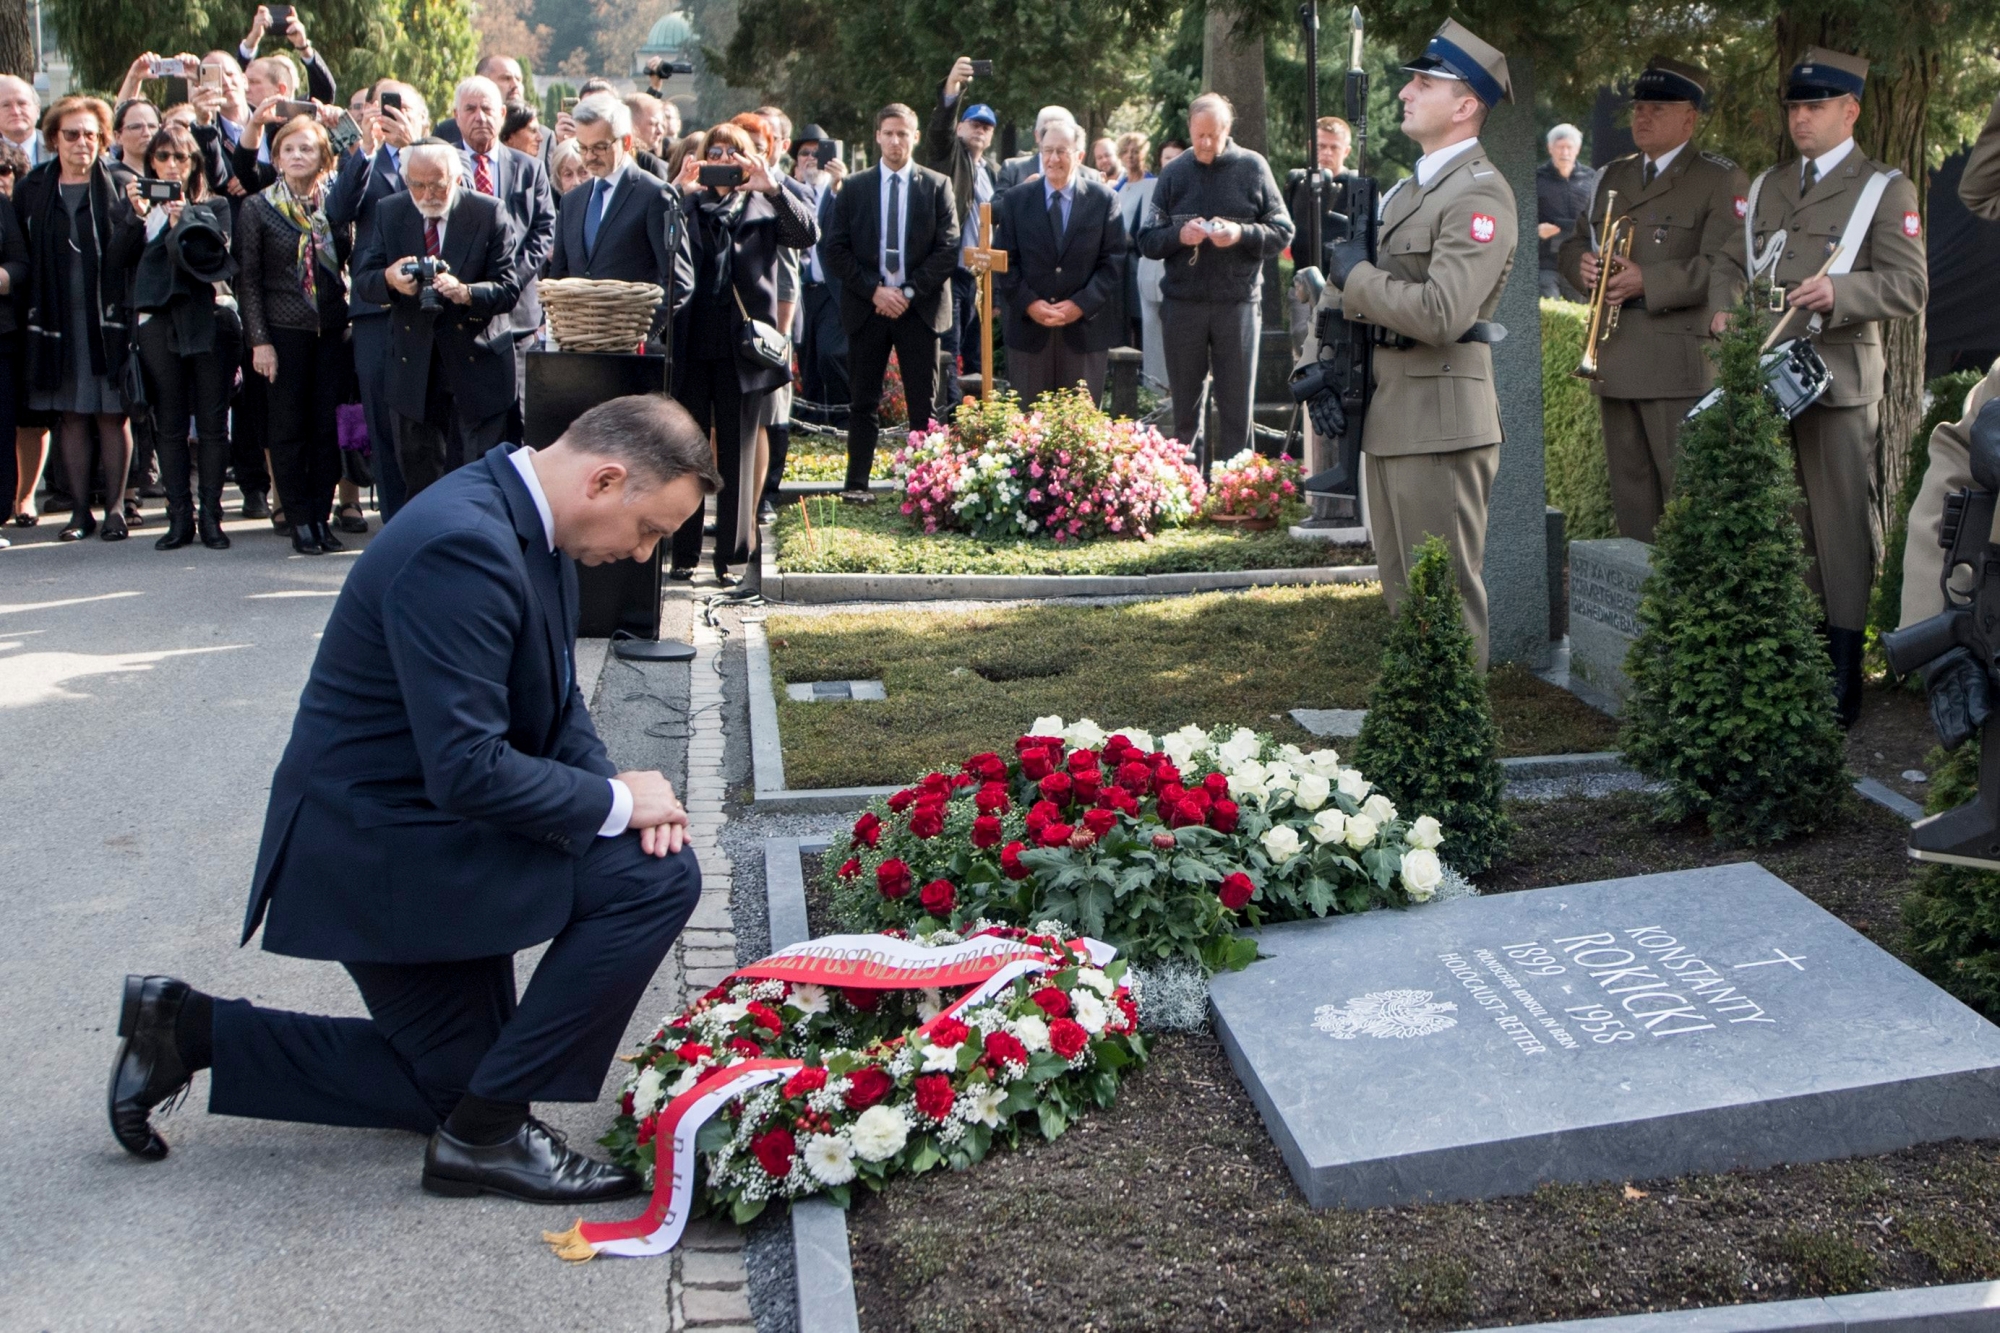 Andrzej Duda, President of the Republic of Poland, and Agata Kornhauser-Duda, First Lady of Poland, at the inauguration of the monument to the polish holocaust savior Konstanty Rokicki, Tuesday, October 9, 2018 at the cemetery Friedental in Lucerne, Switzerland.  (KEYSTONE/Urs Flueeler) SWITZERLAND VISIT ANDRZEJ DUDA